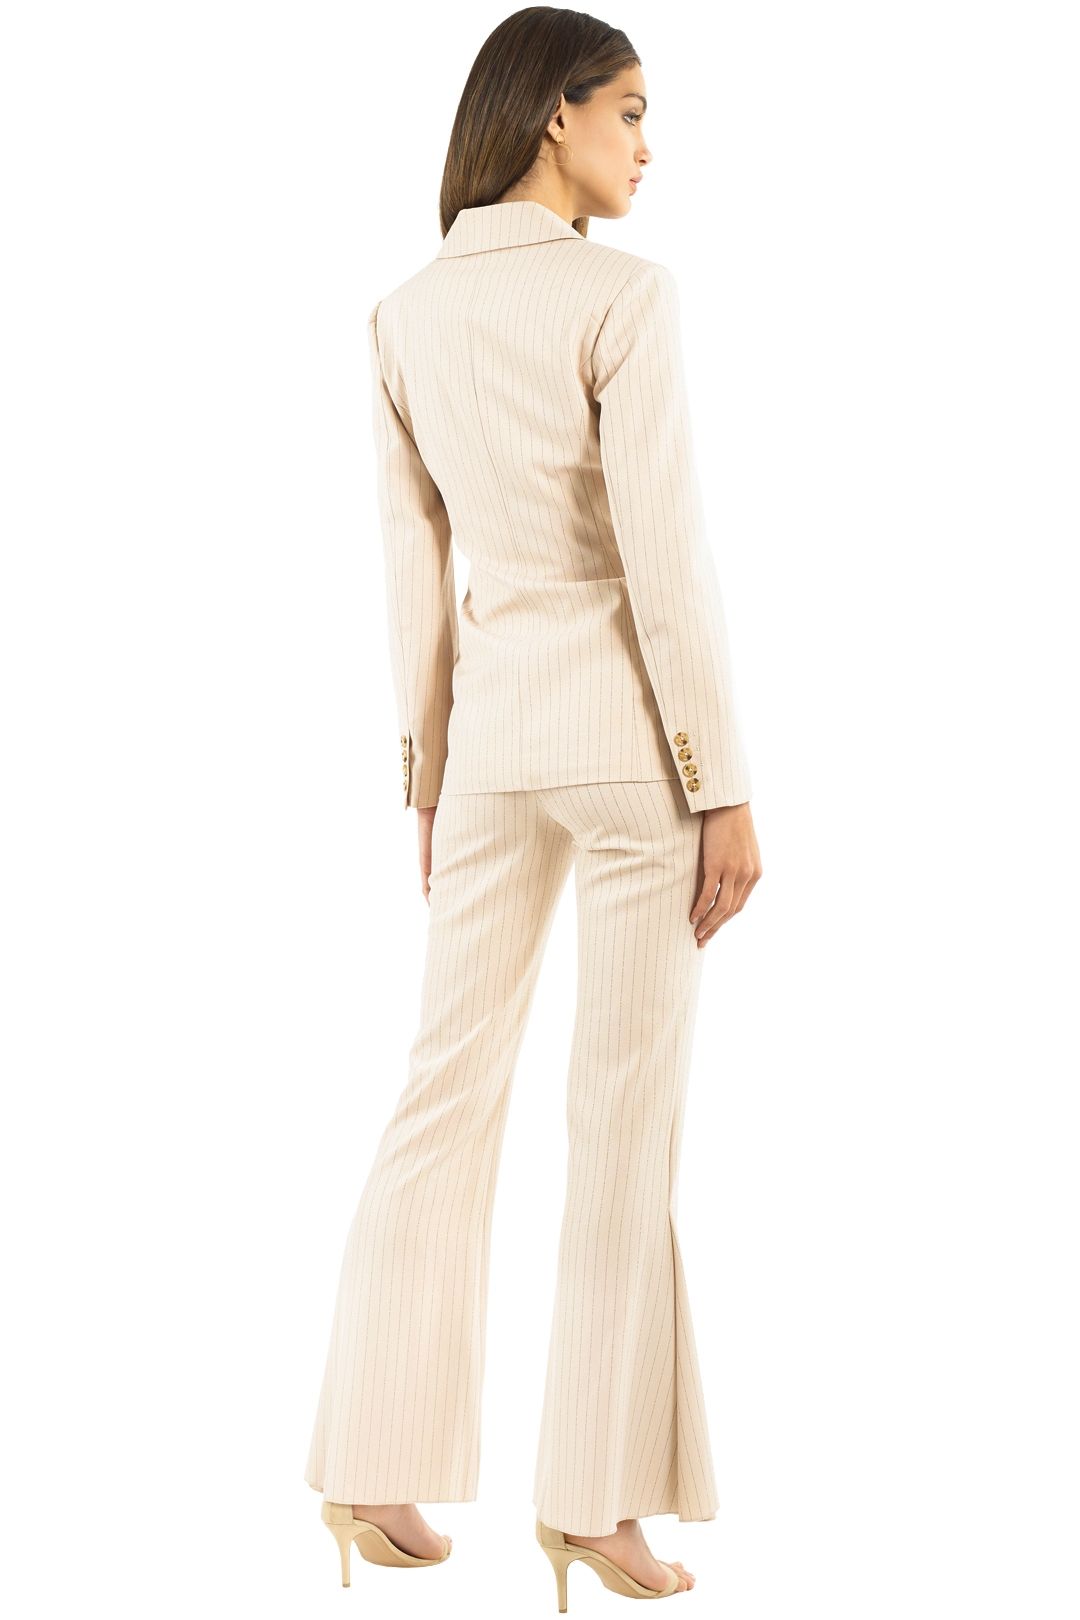 CMEO Collective - Go From Here Blazer & Pant Set - Nude - Back